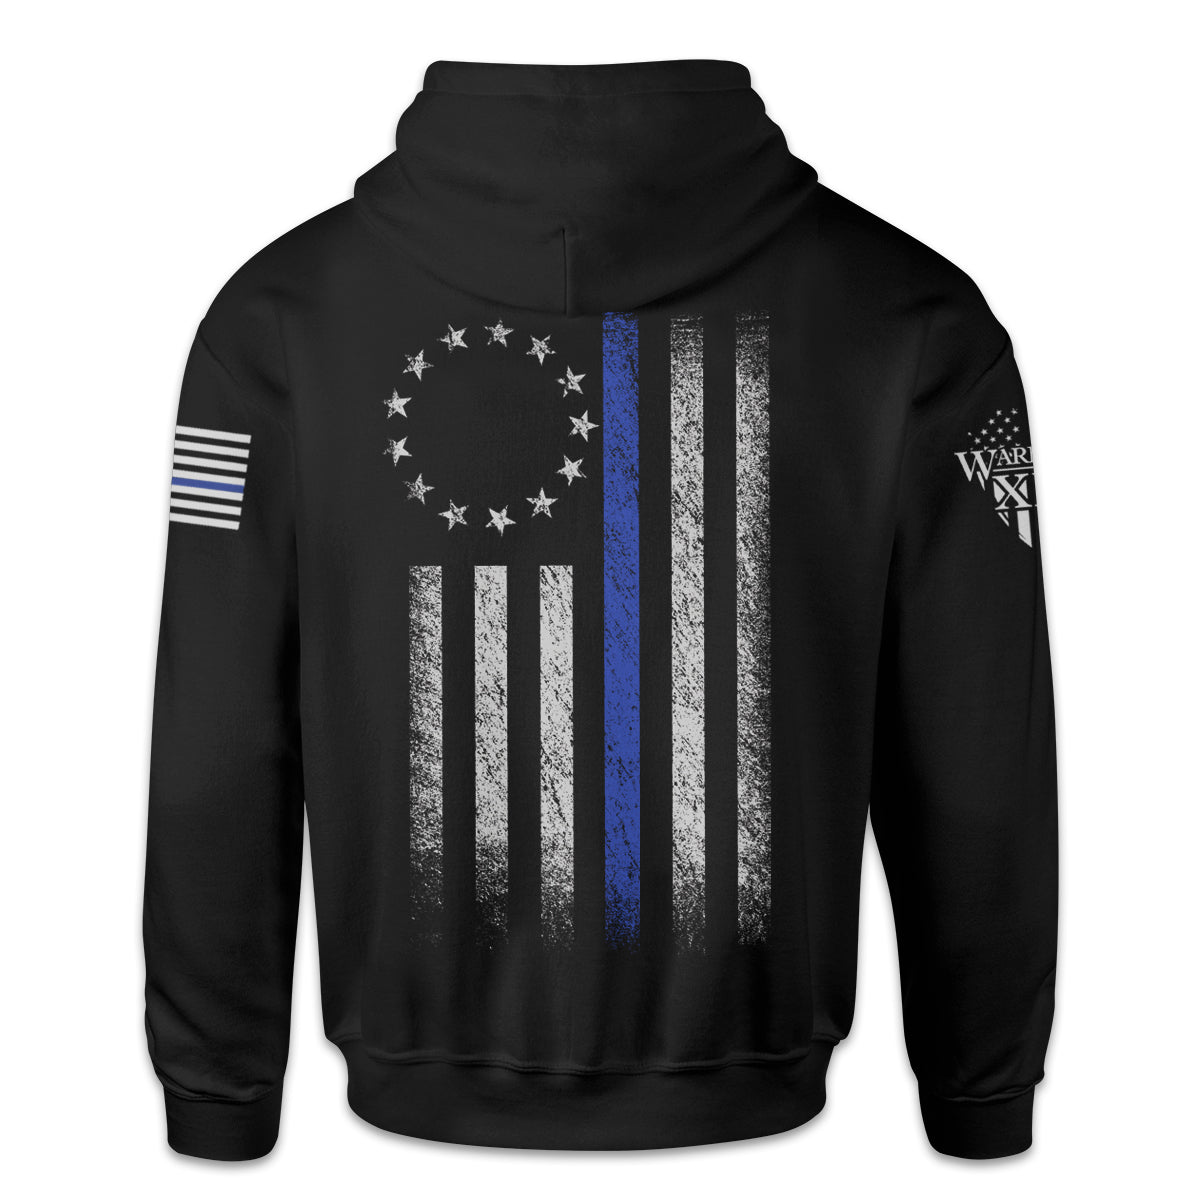 A black hoodie that features a thin blue line Betsy Ross flag on a back print to show that we remain undeterred in our support for American law enforcement. printed on the back of the shirt.